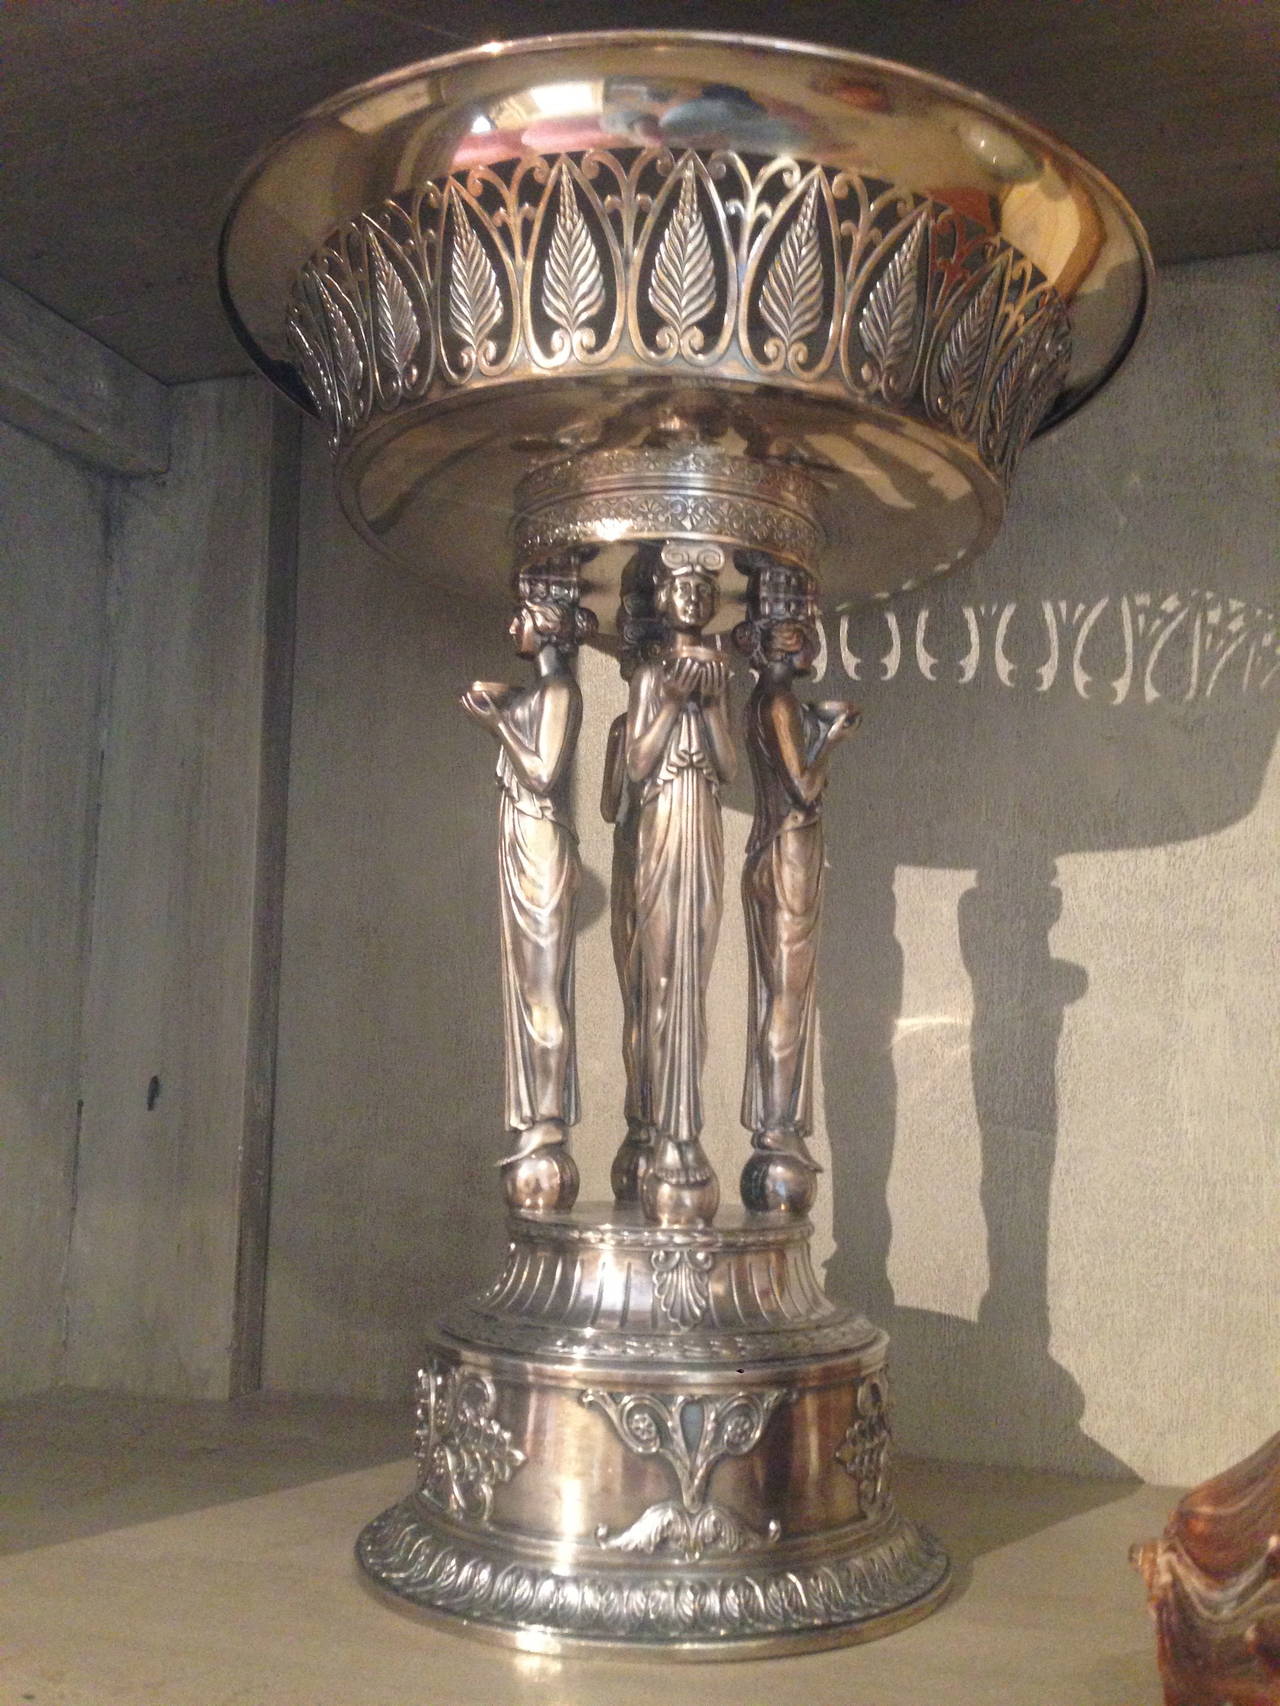 Early 20th century French silver stylized compote with four maidens in draped gowns holding a pierced acanthus bowl.